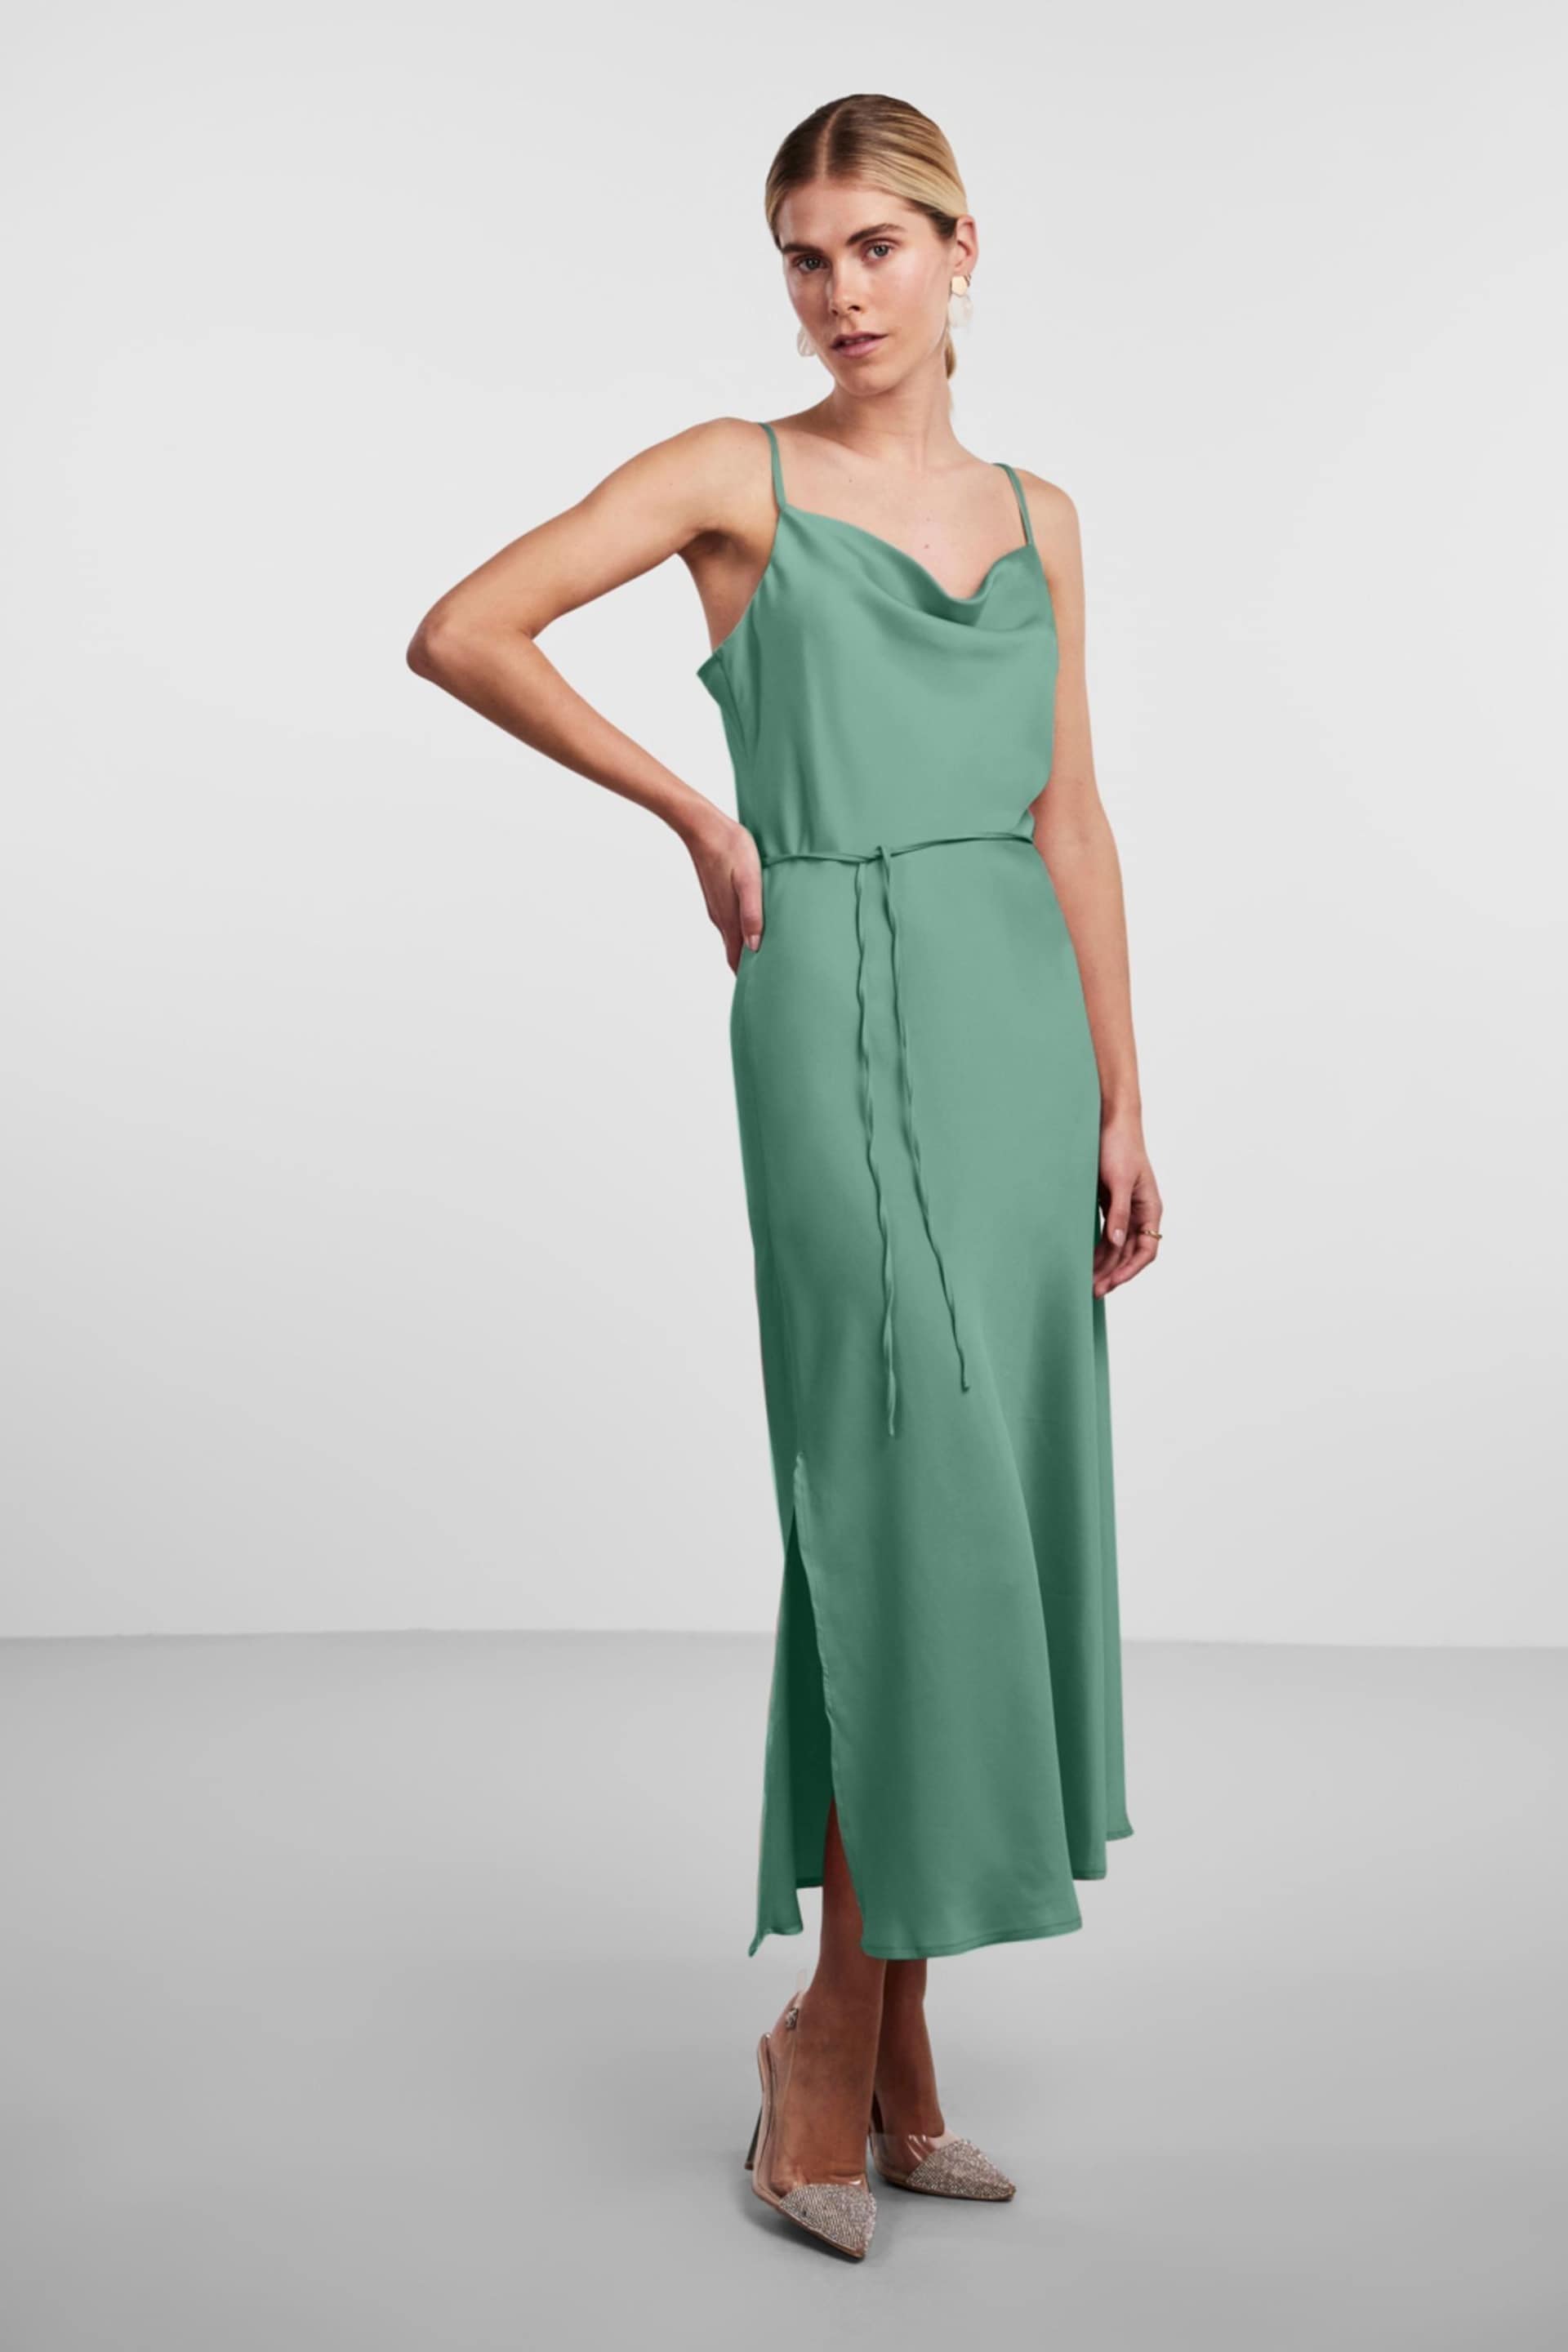 Y.A.S Green Satin Cowl Neck Slip Dress - Image 3 of 5